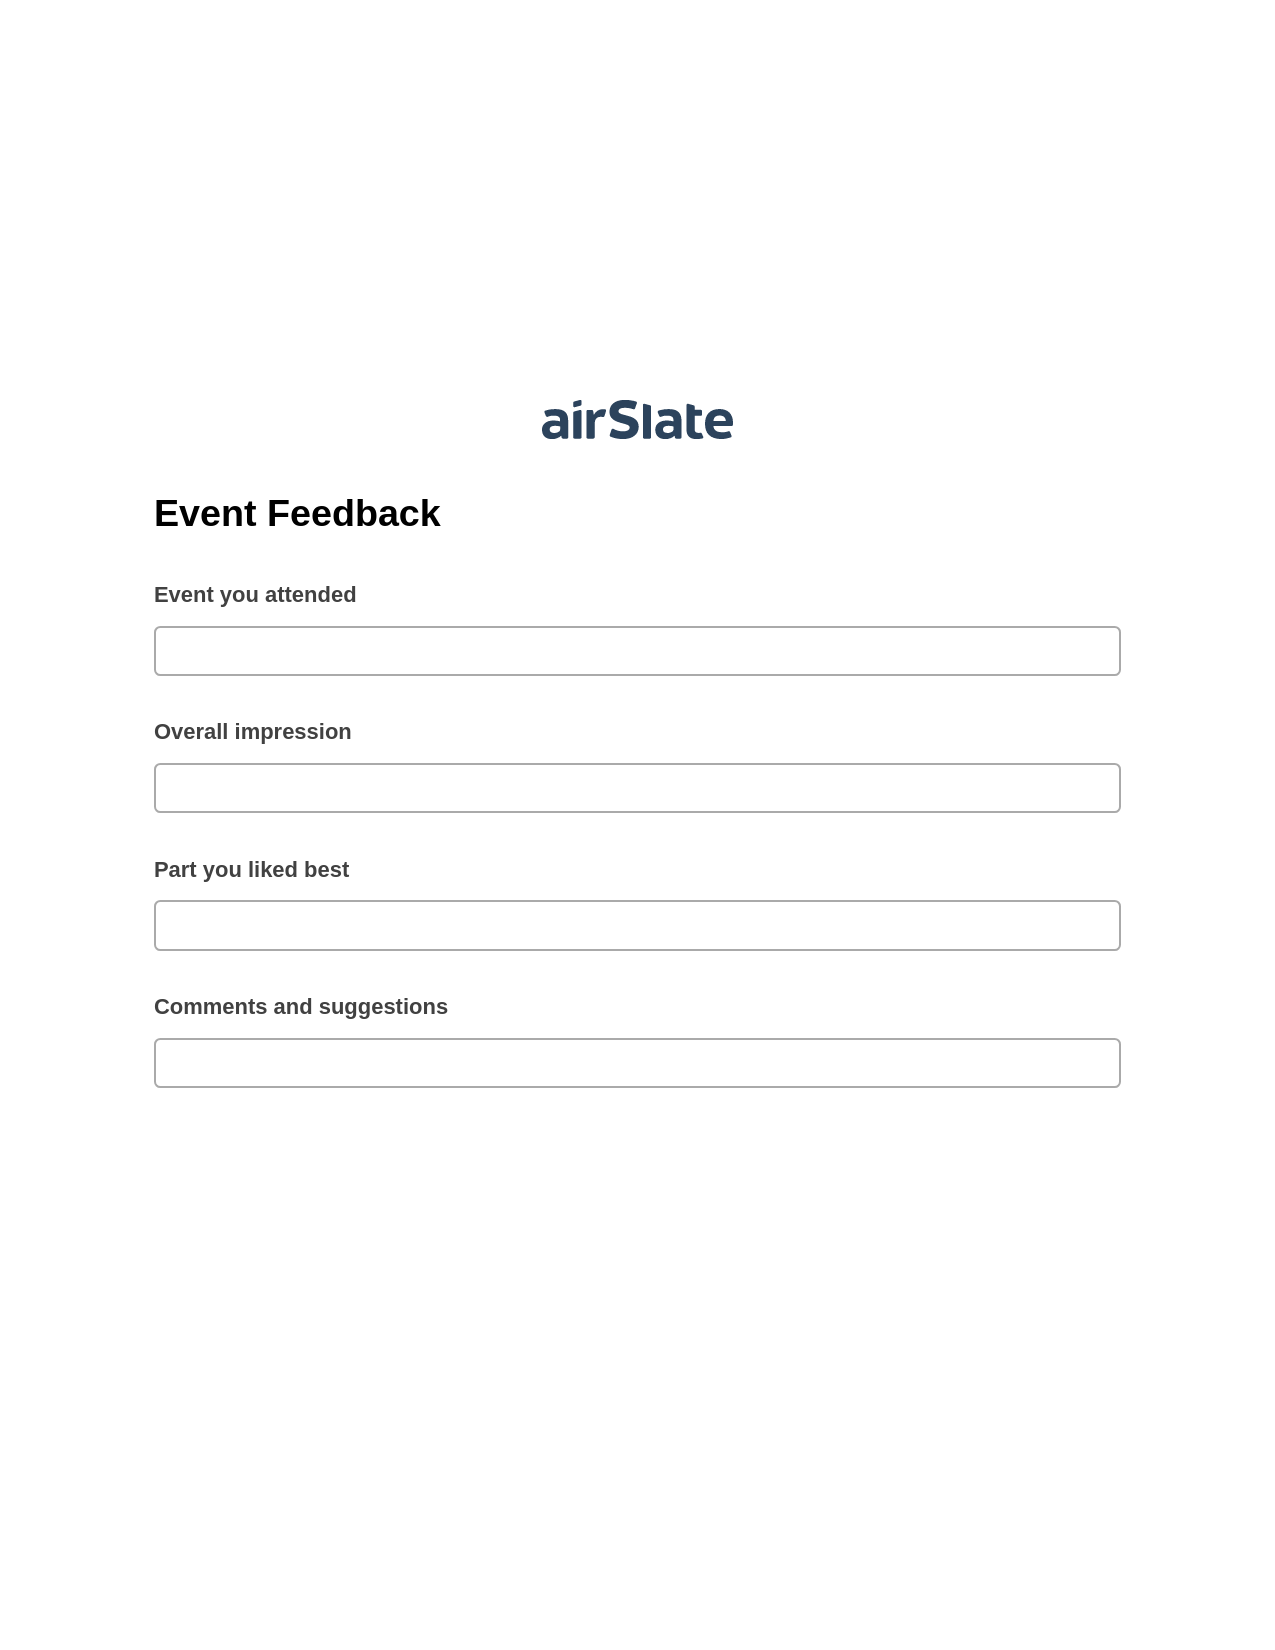 Event Feedback Pre-fill from Salesforce Record Bot, Create Salesforce Record Bot, Export to Excel 365 Bot